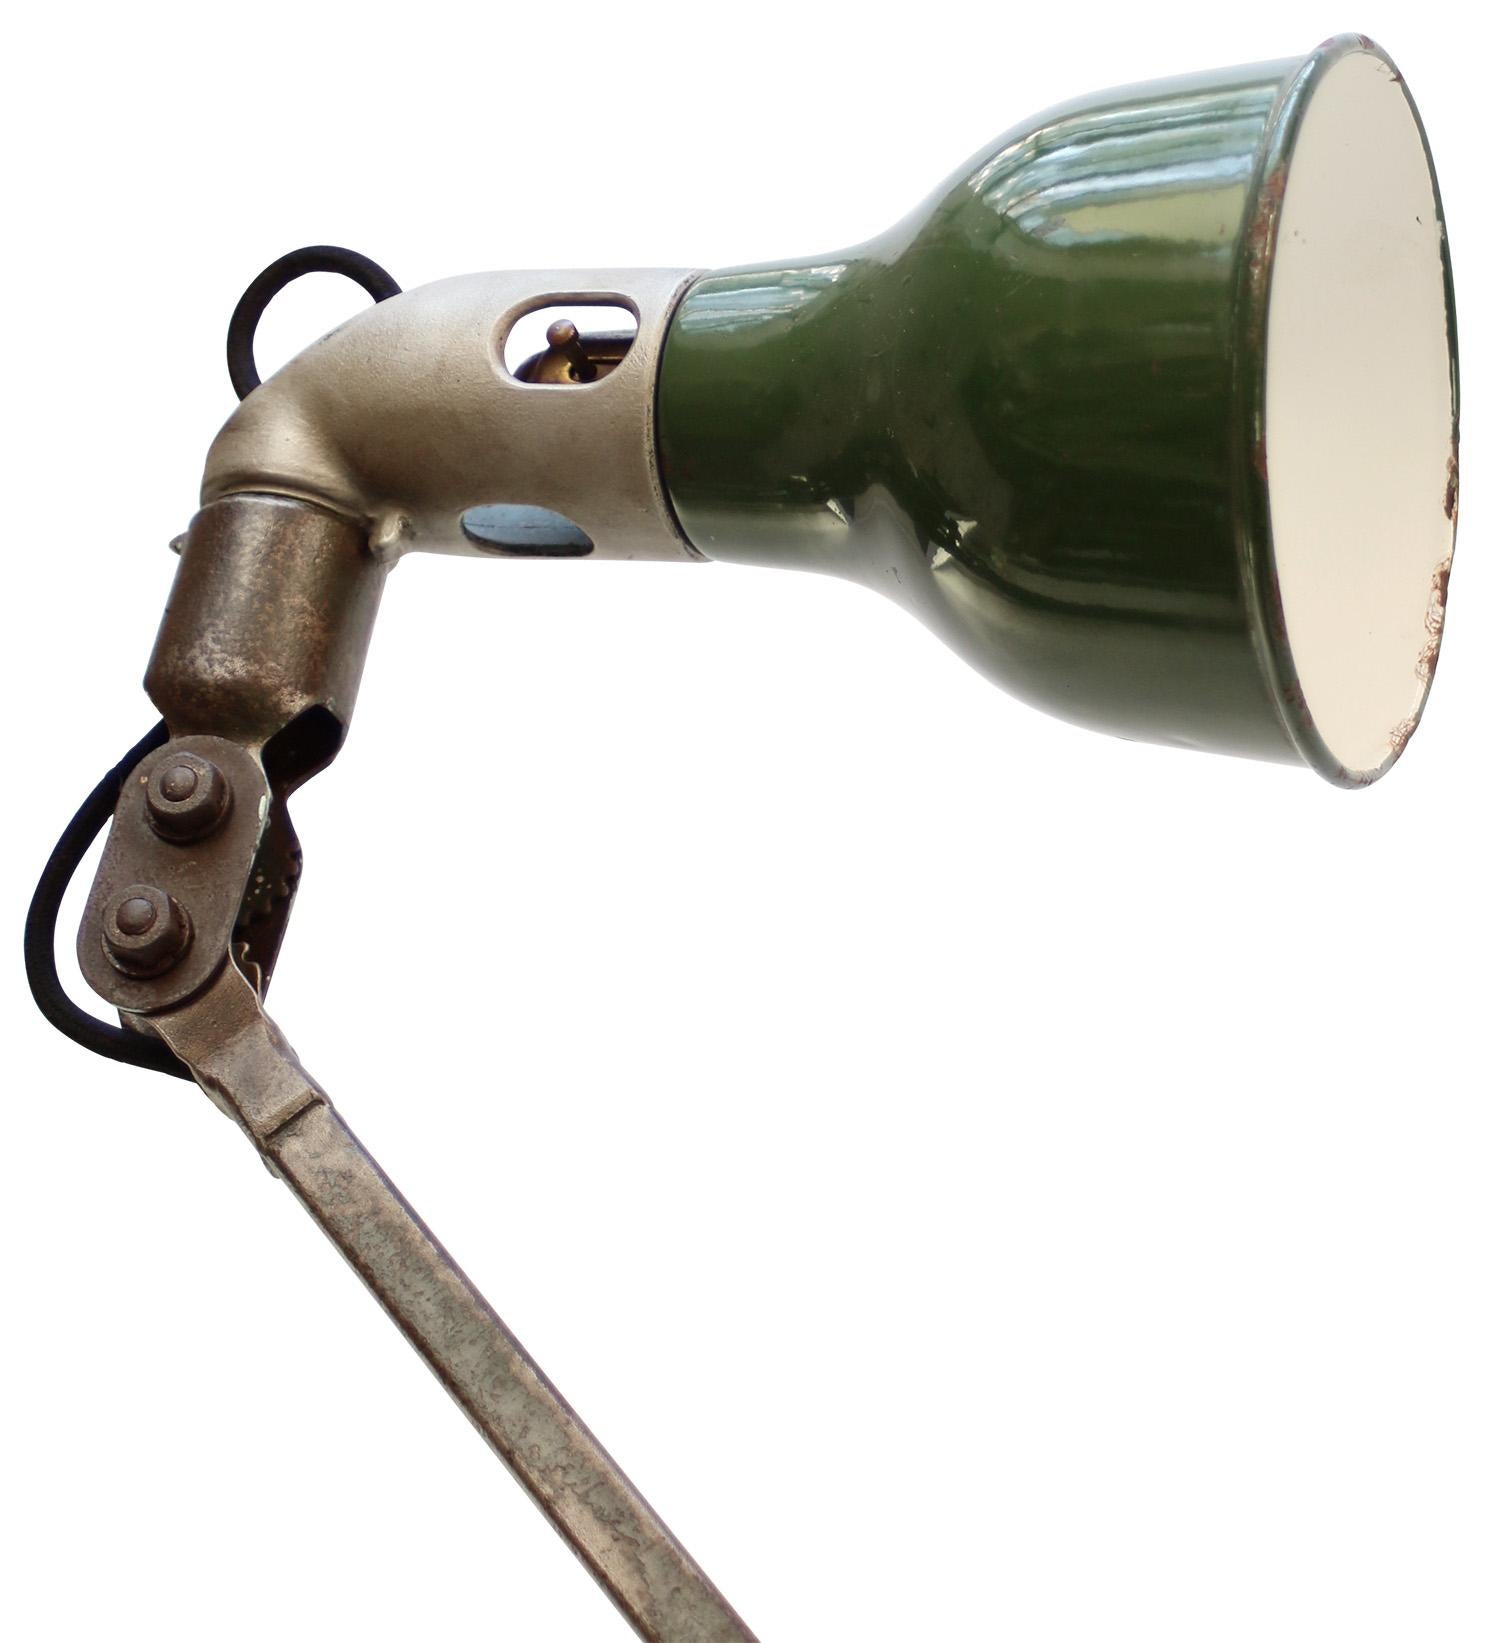 1930s Green enamel, cast iron industrial 2 arm machinist work light by MEK ELEK, UK
adjustable in height and angle
including plug and switch

Diameter base 13.5 cm

B22 bulb holder

Weight: 4.00 kg / 8.8 lb

Priced per individual item. All